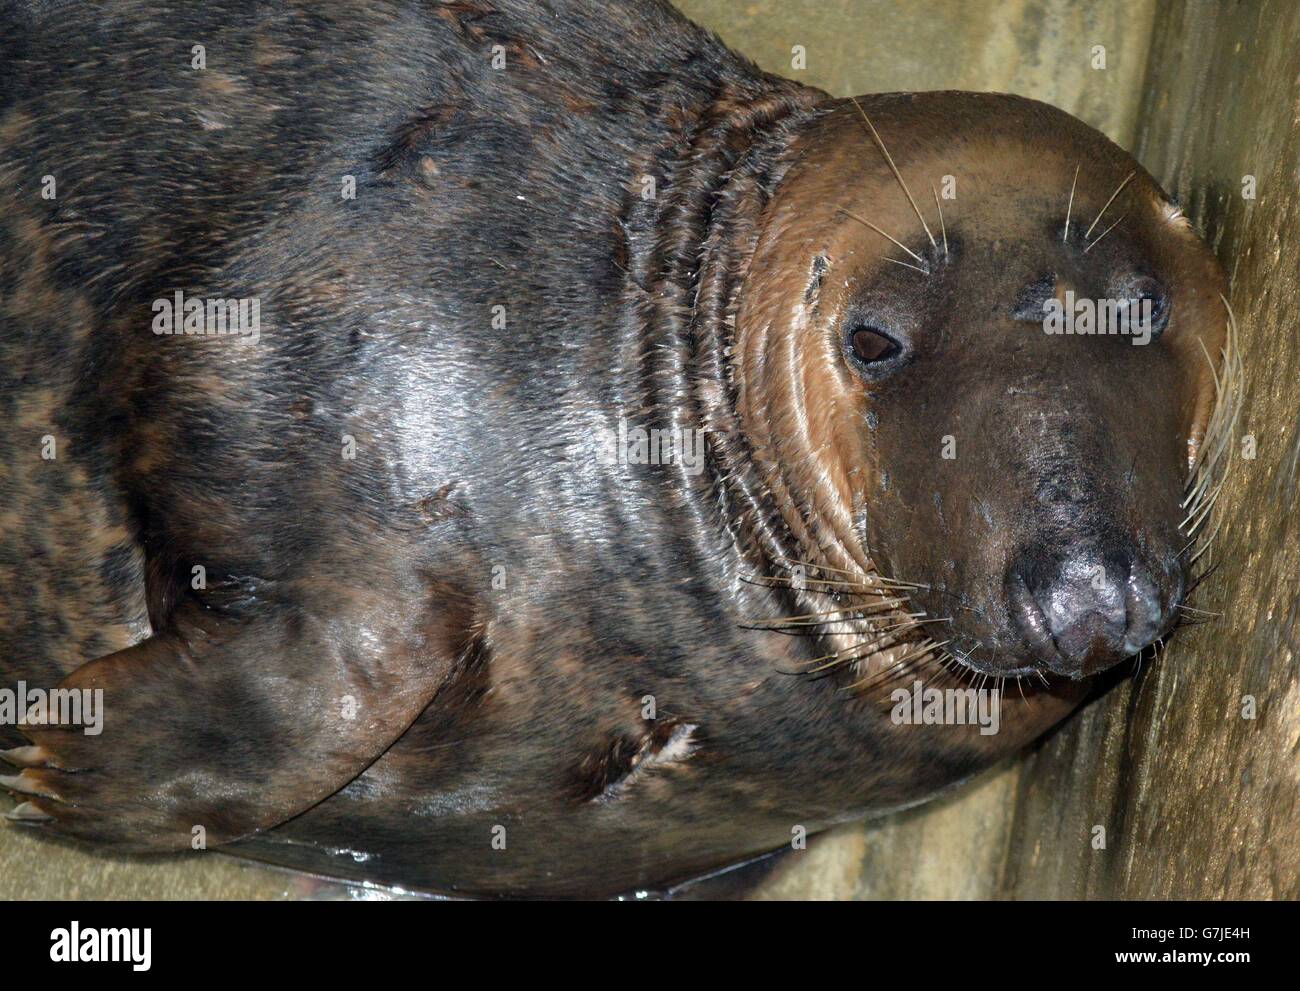 Dumbledore, the seal that was found stranded in a field in Newton-le-Willows, Merseyside, at least 20 miles (32km) from the sea on December 22, has now eaten his first meal since being rescued. Stock Photo